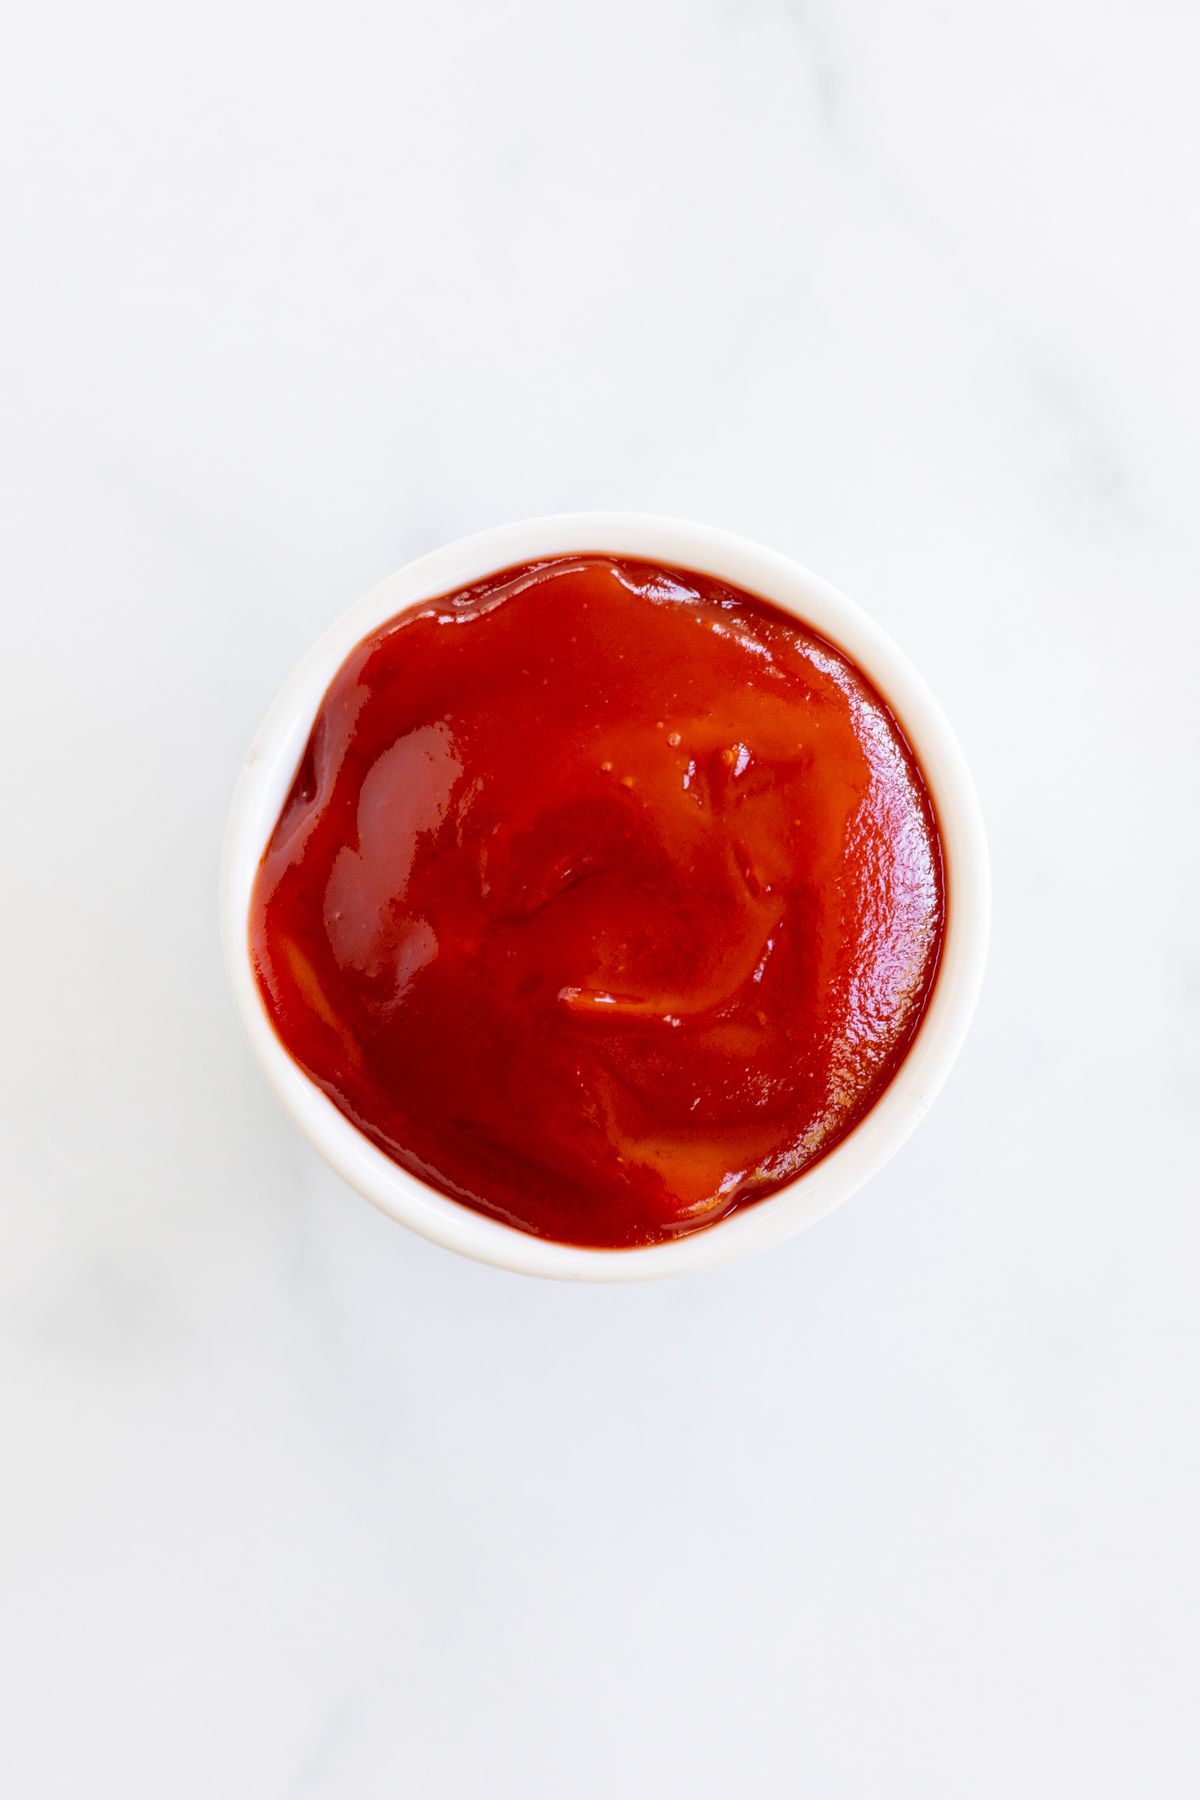 A small bowl of ketchup on a marble countertop, image is featured in a guide to tomato paste substitutes.